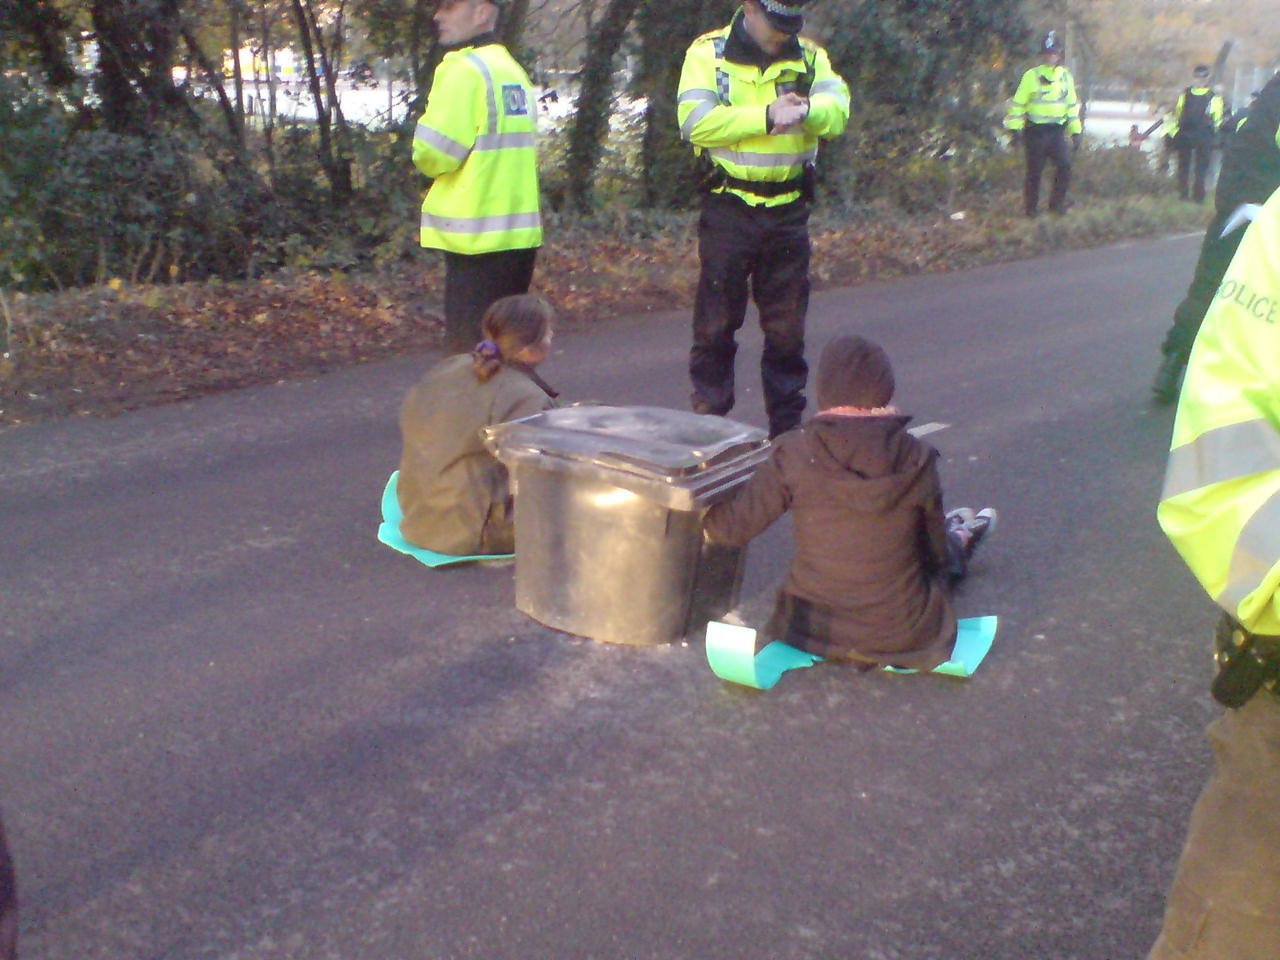 Sitting in the road with a bin